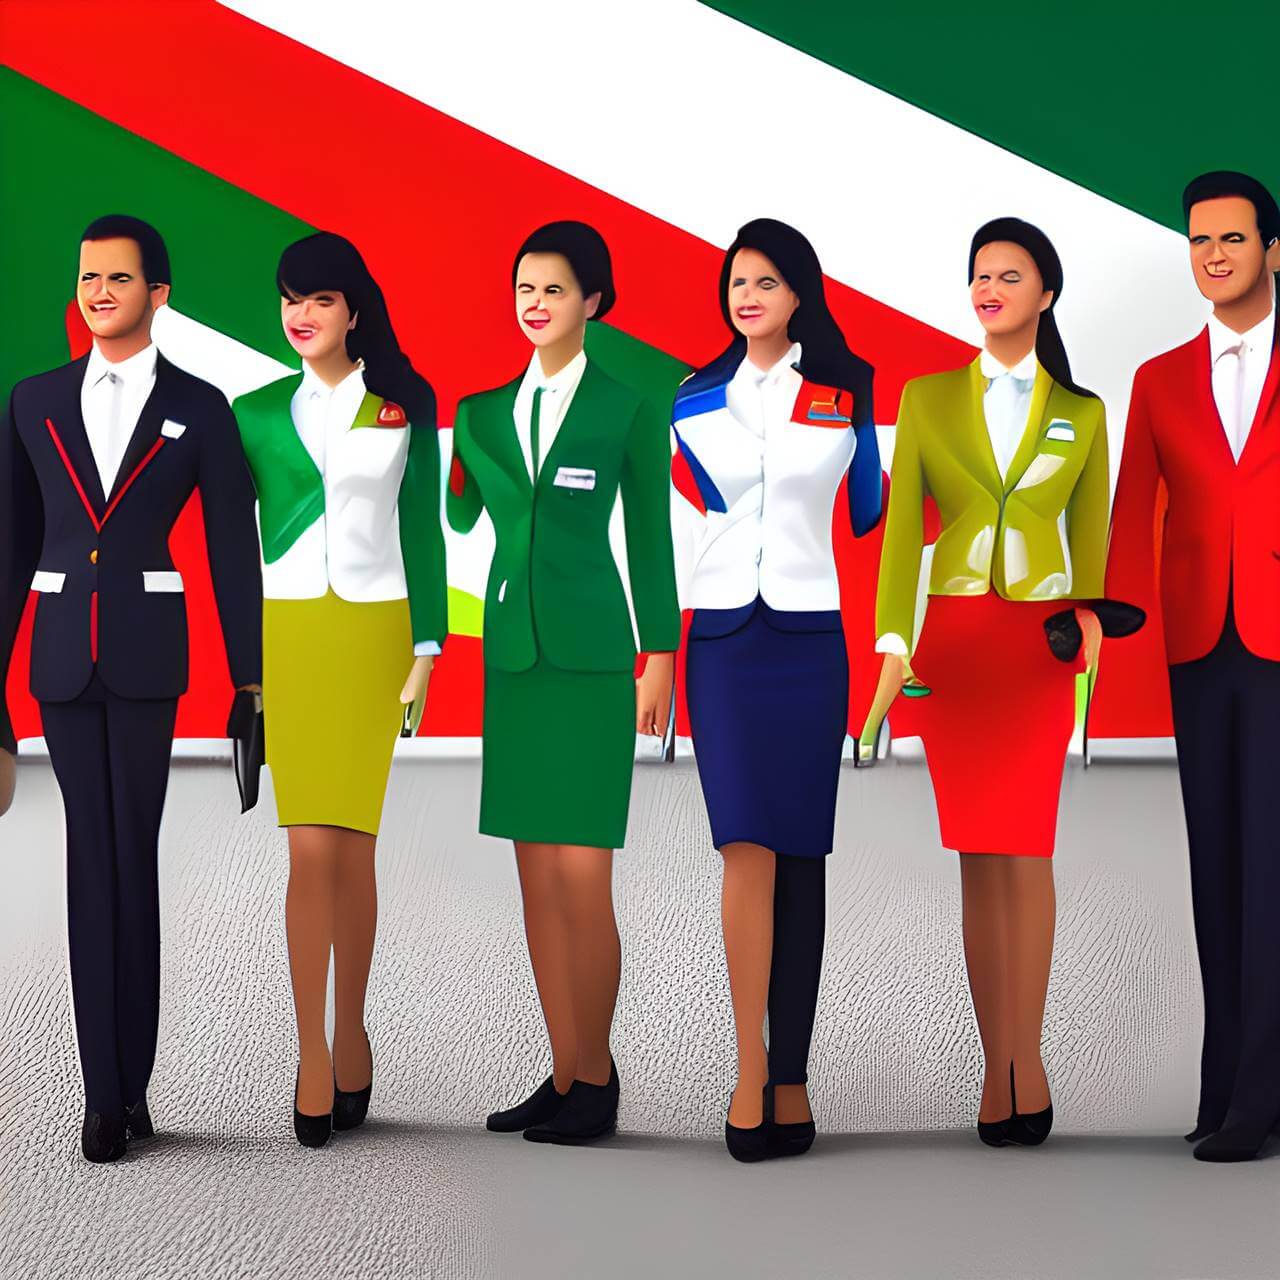 How to become a cabin crew in Mexico